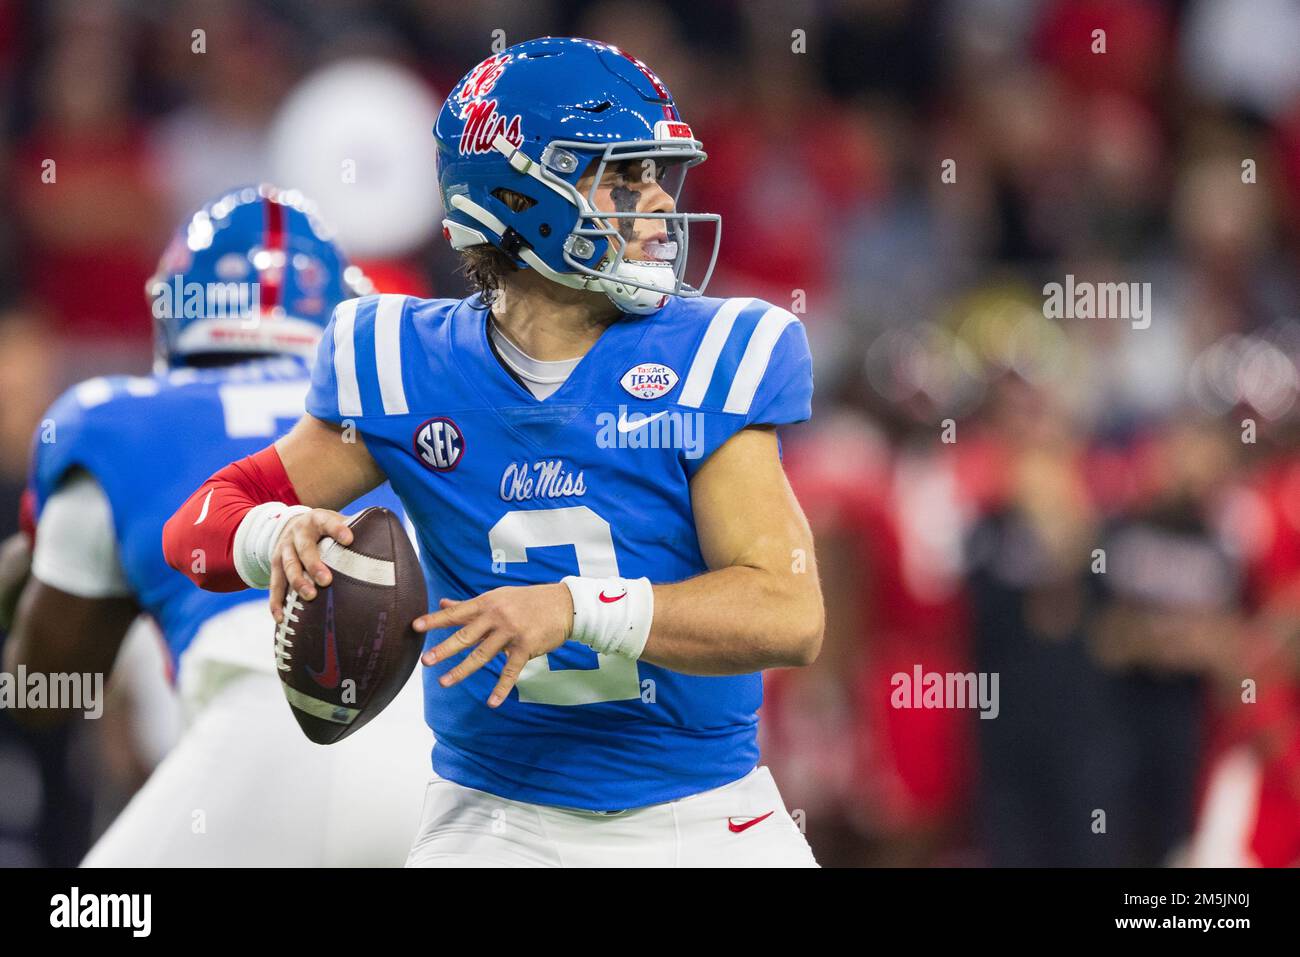 Ole Miss Rebels quarterback Jaxson Dart (2) looks to pass against the Texas Tech Red Raiders defense during the 2022 TaxAct Texas Bowl, Wednesday, Dec Stock Photo